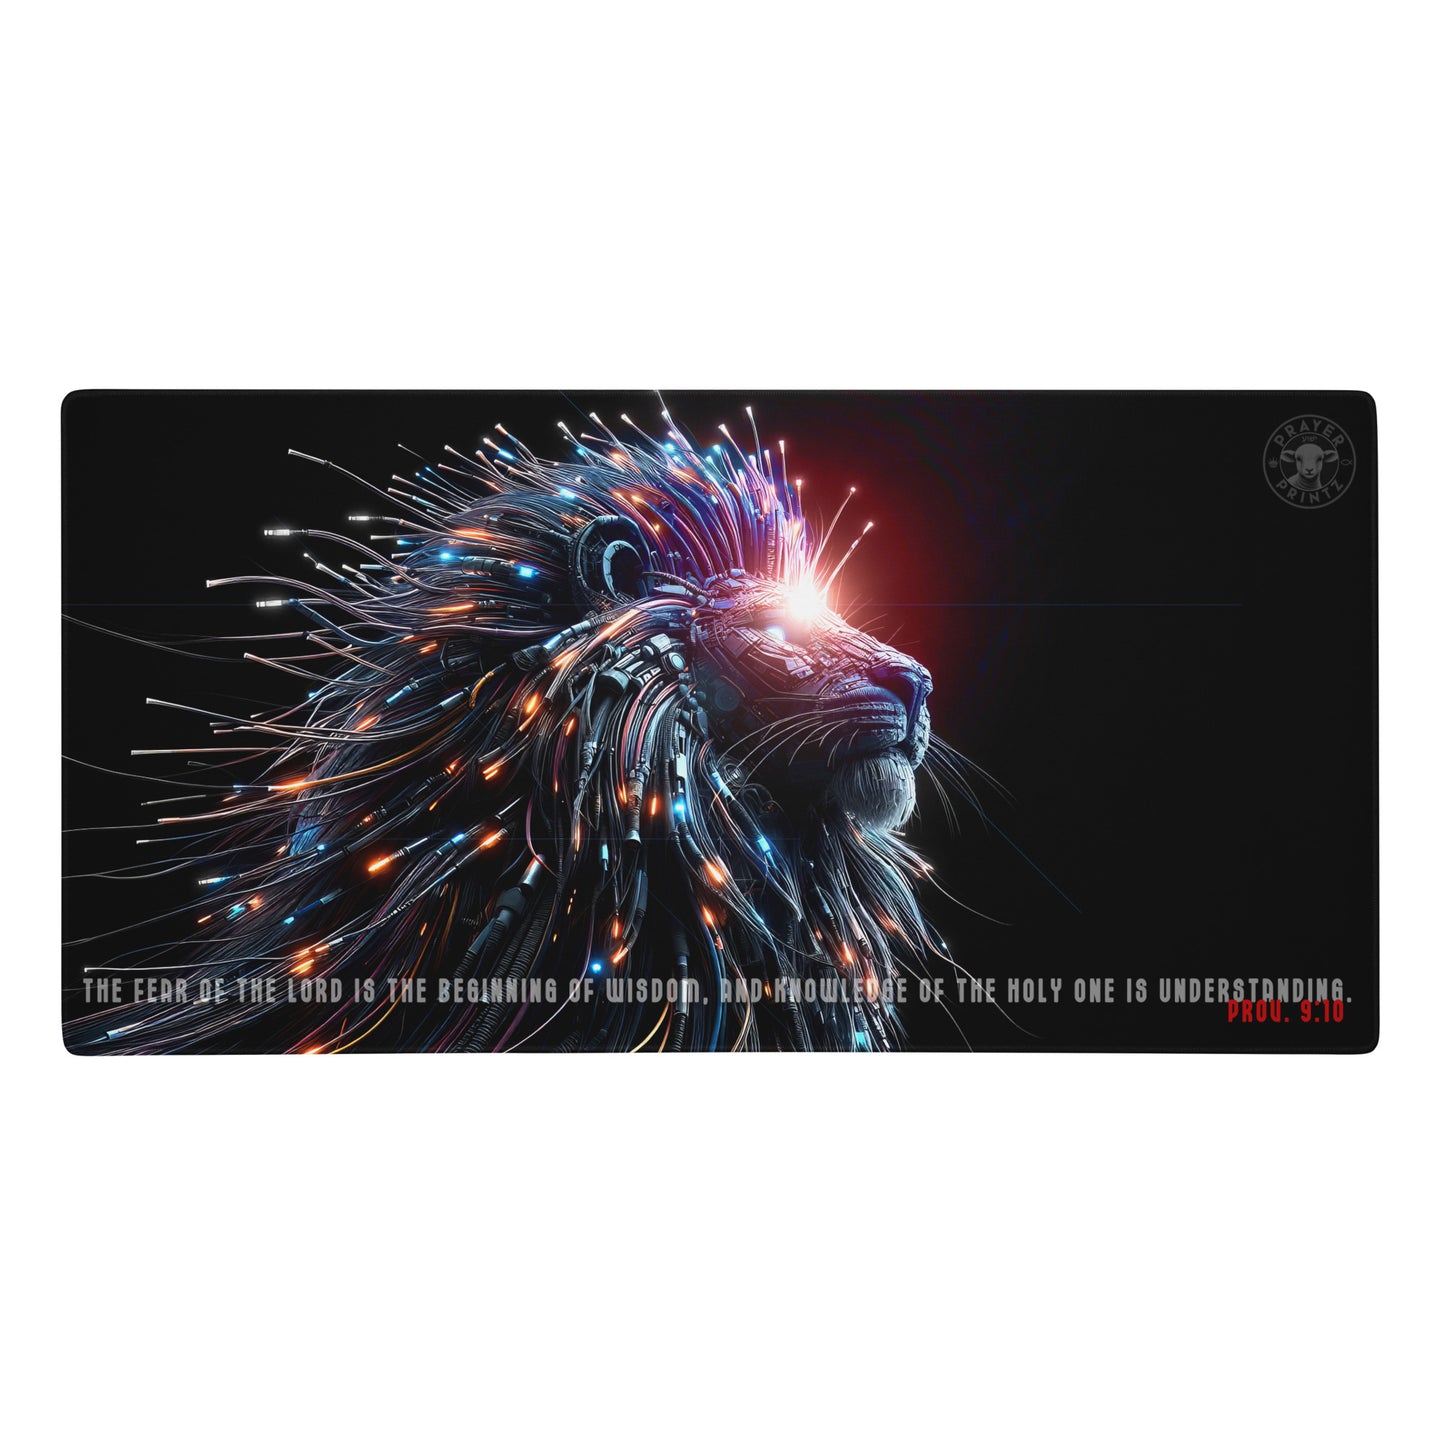 Digital Lion of Judah Gaming Computer Mouse Pad by Raul Anthony Monge, Computer Pad